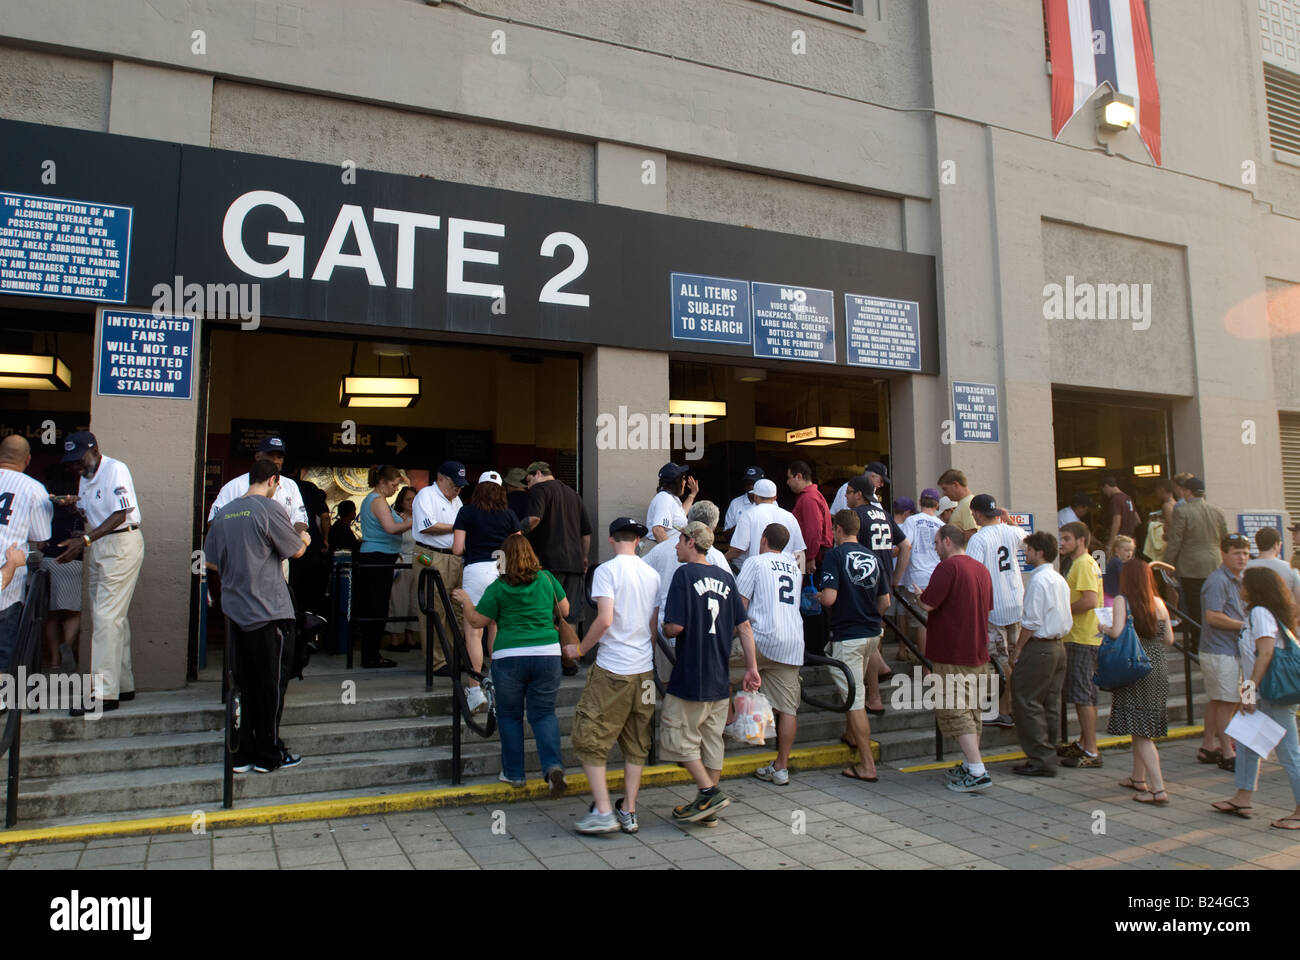 Baseball fans arrive at Yankee Stadium in the New York borough to The Bronx Stock Photo